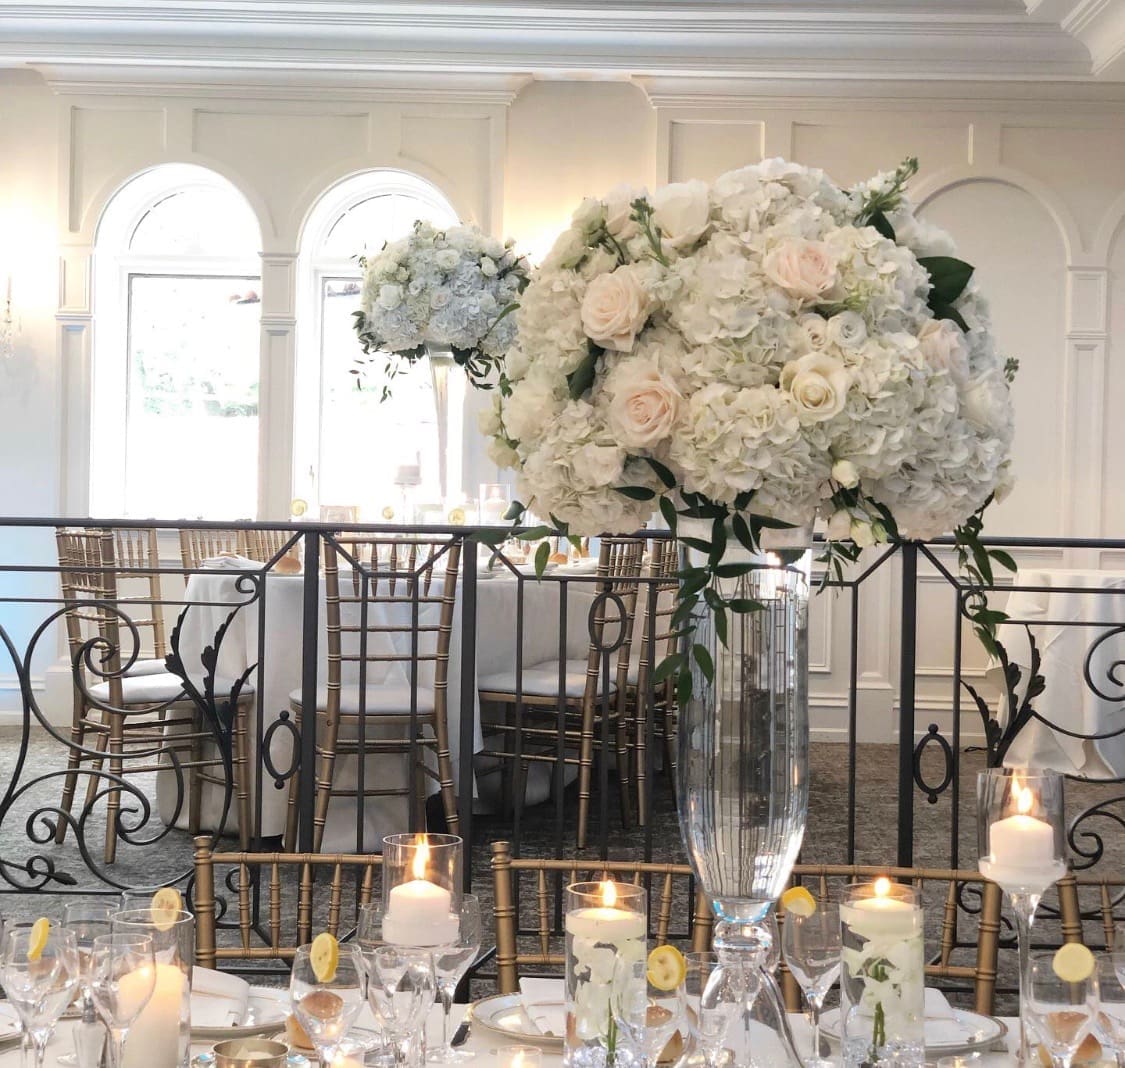 A romantic wedding reception with elegant white flowers and flickering candles, creating a stunning tablescape.